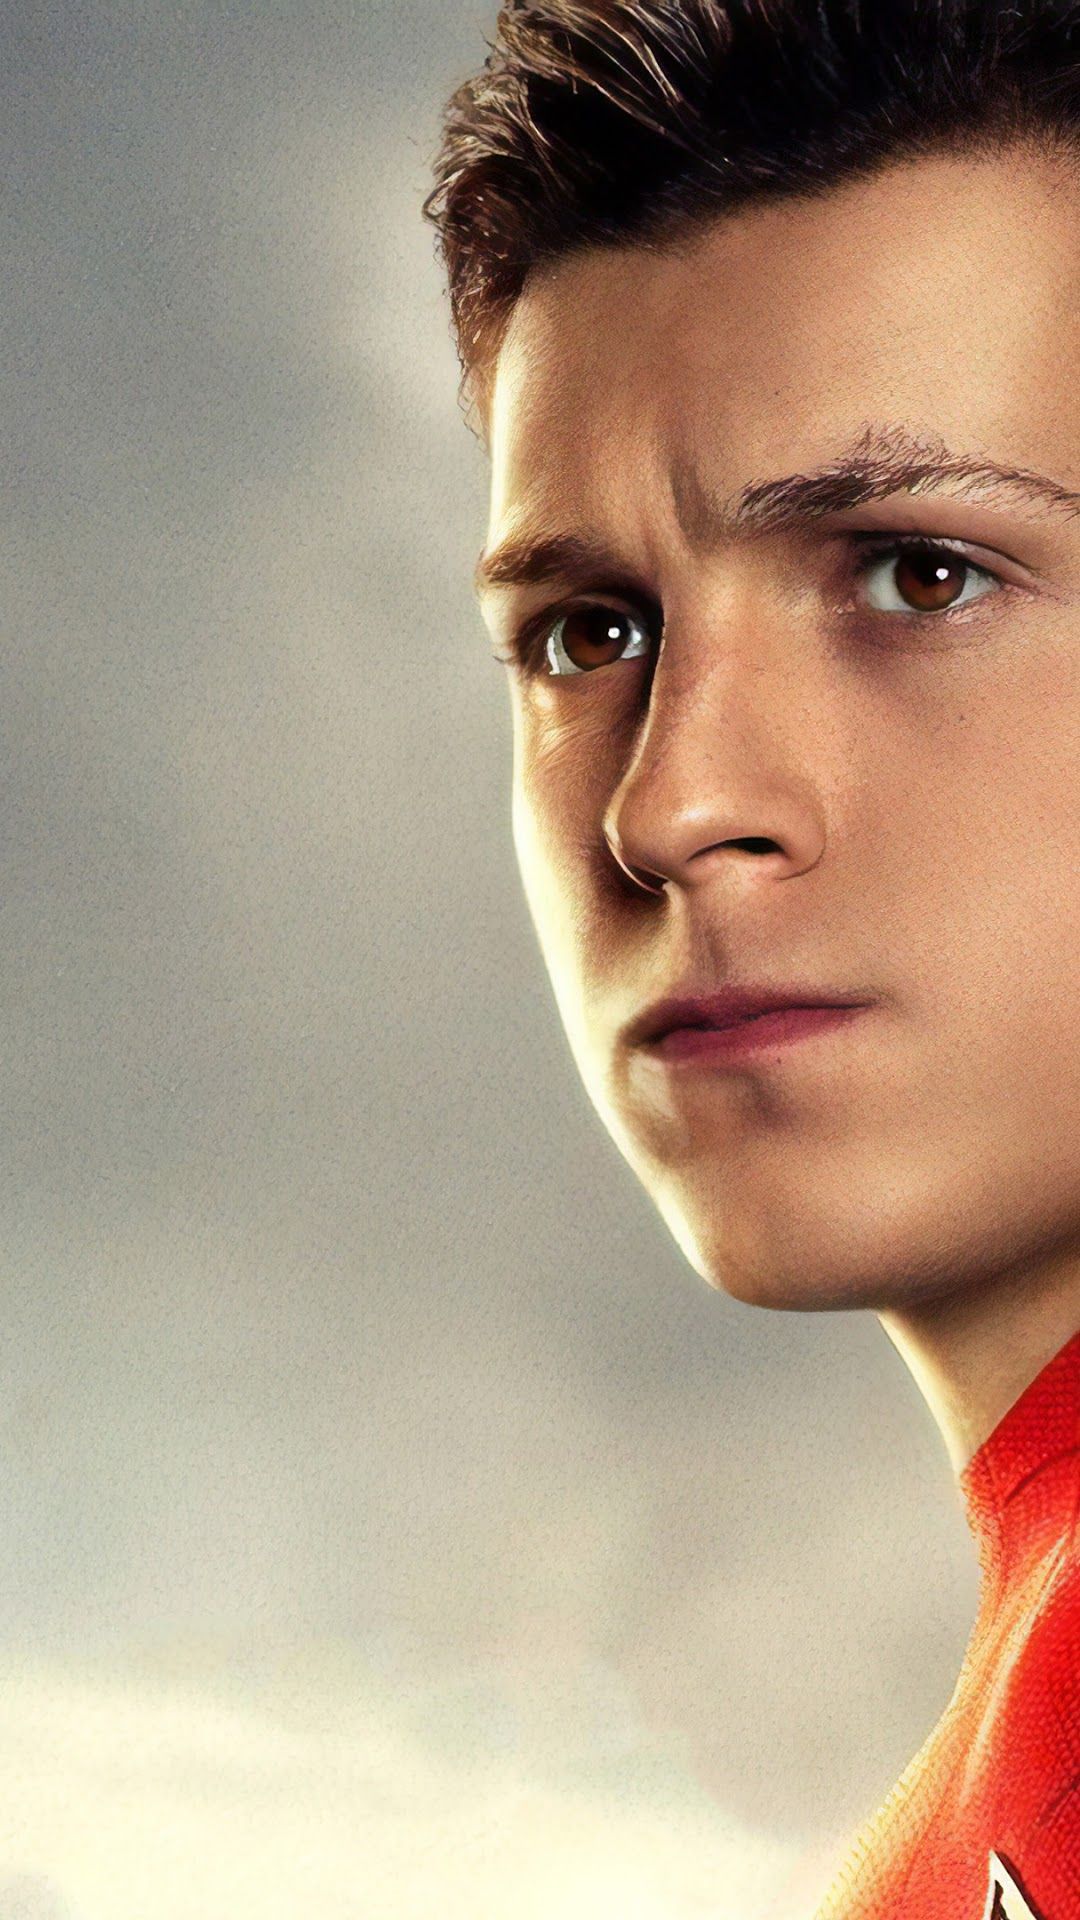 Tom Holland 2021 Wallpapers - Wallpaper Cave